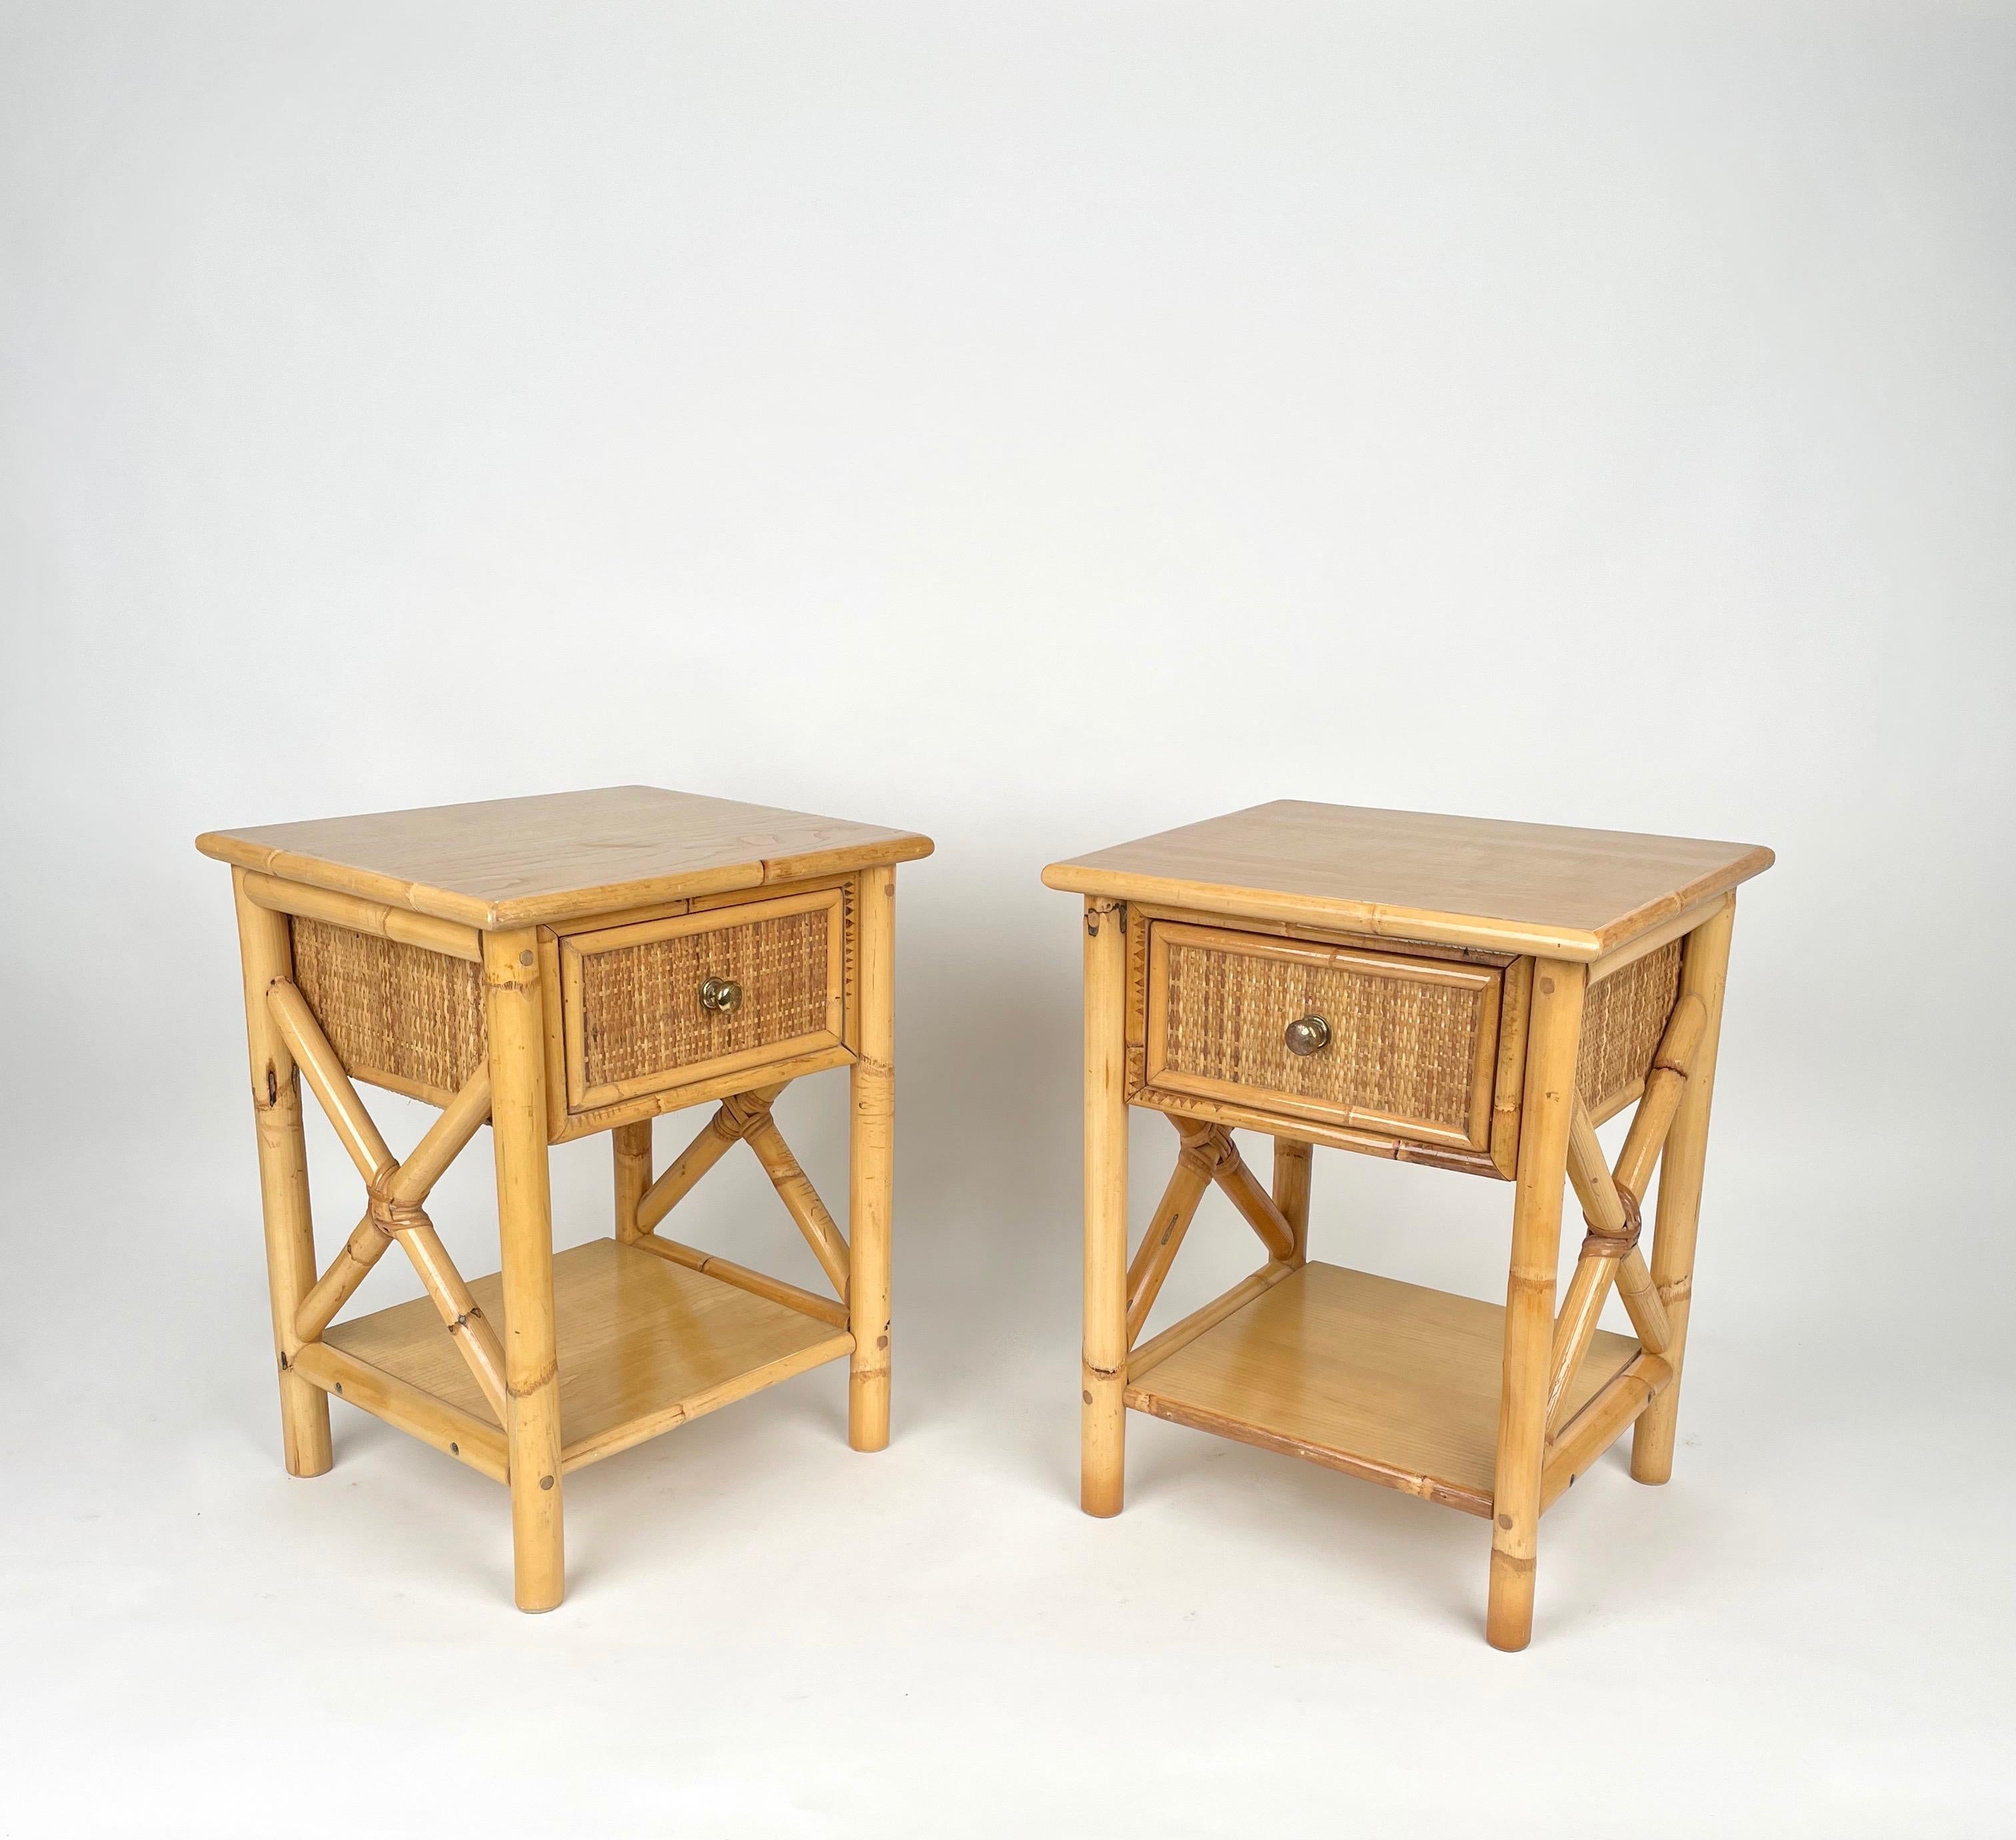 Pair of Bed Side Tables in Bamboo, Rattan & Wood, Italy 1980s In Good Condition For Sale In Rome, IT